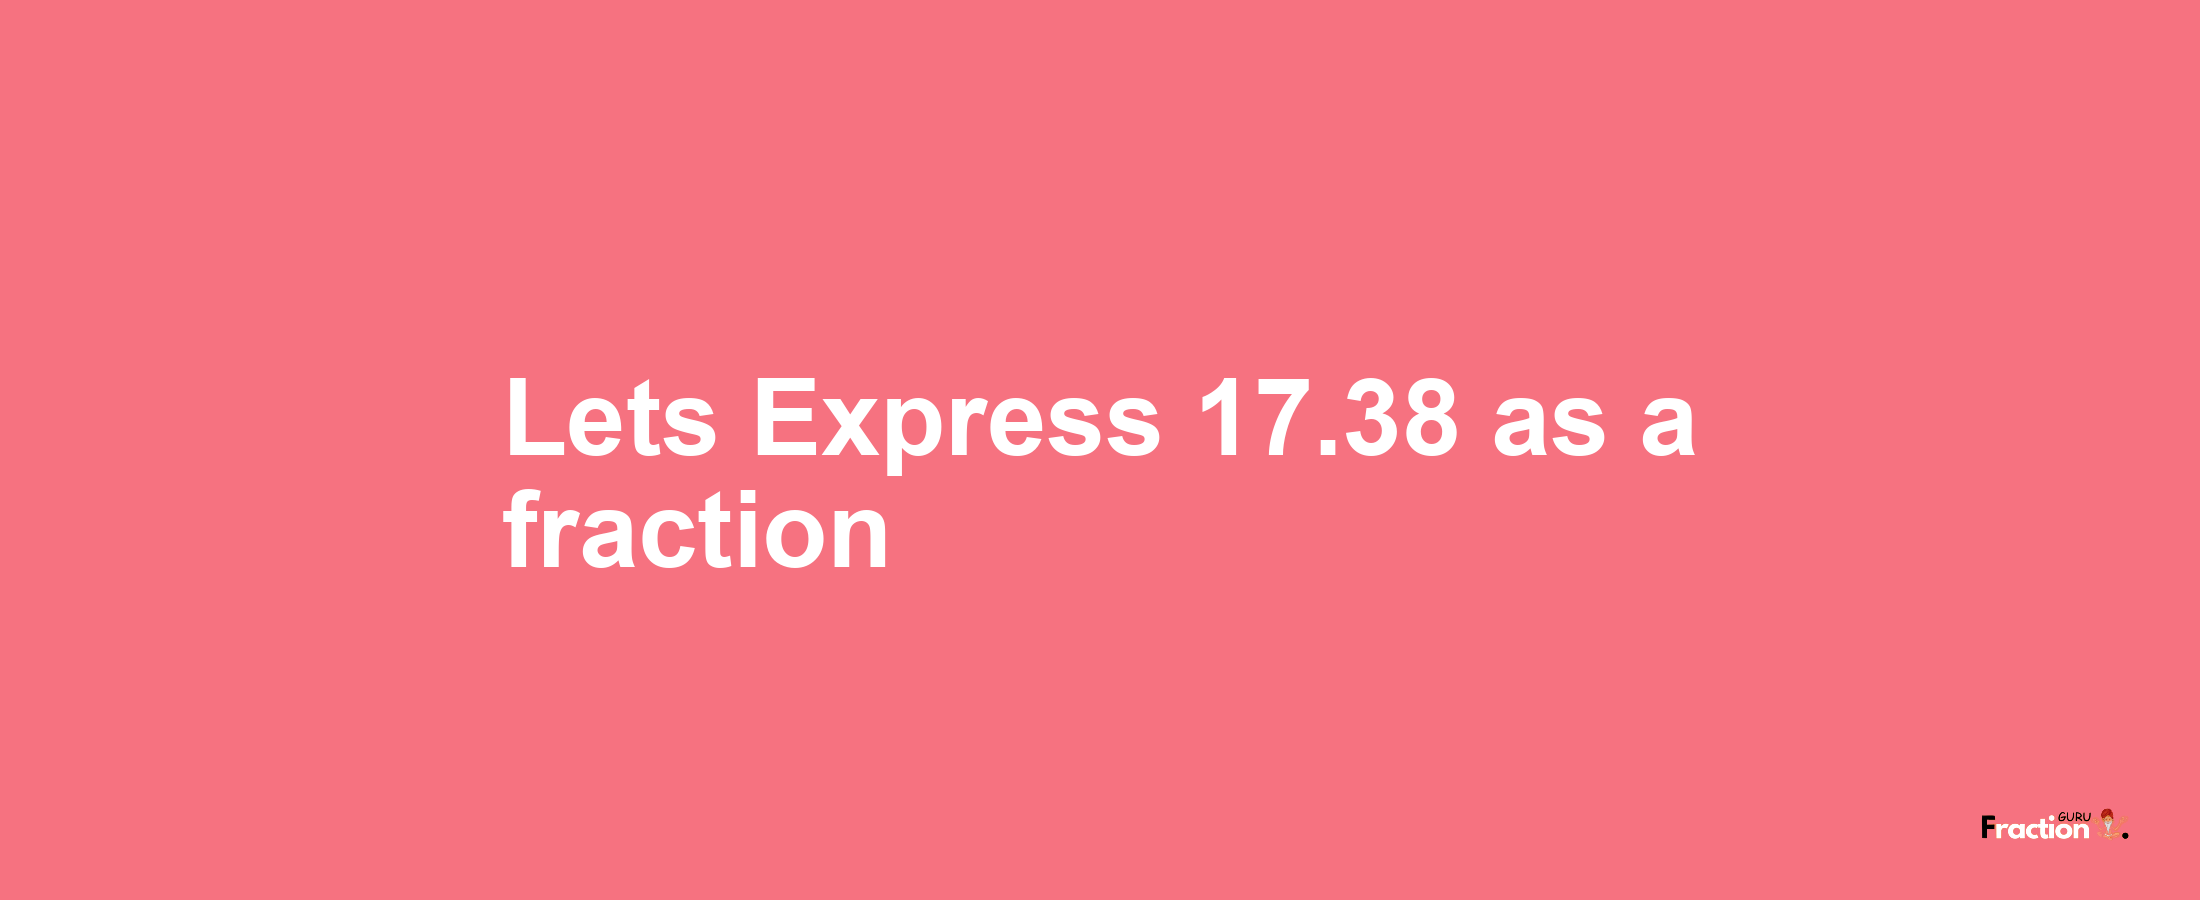 Lets Express 17.38 as afraction